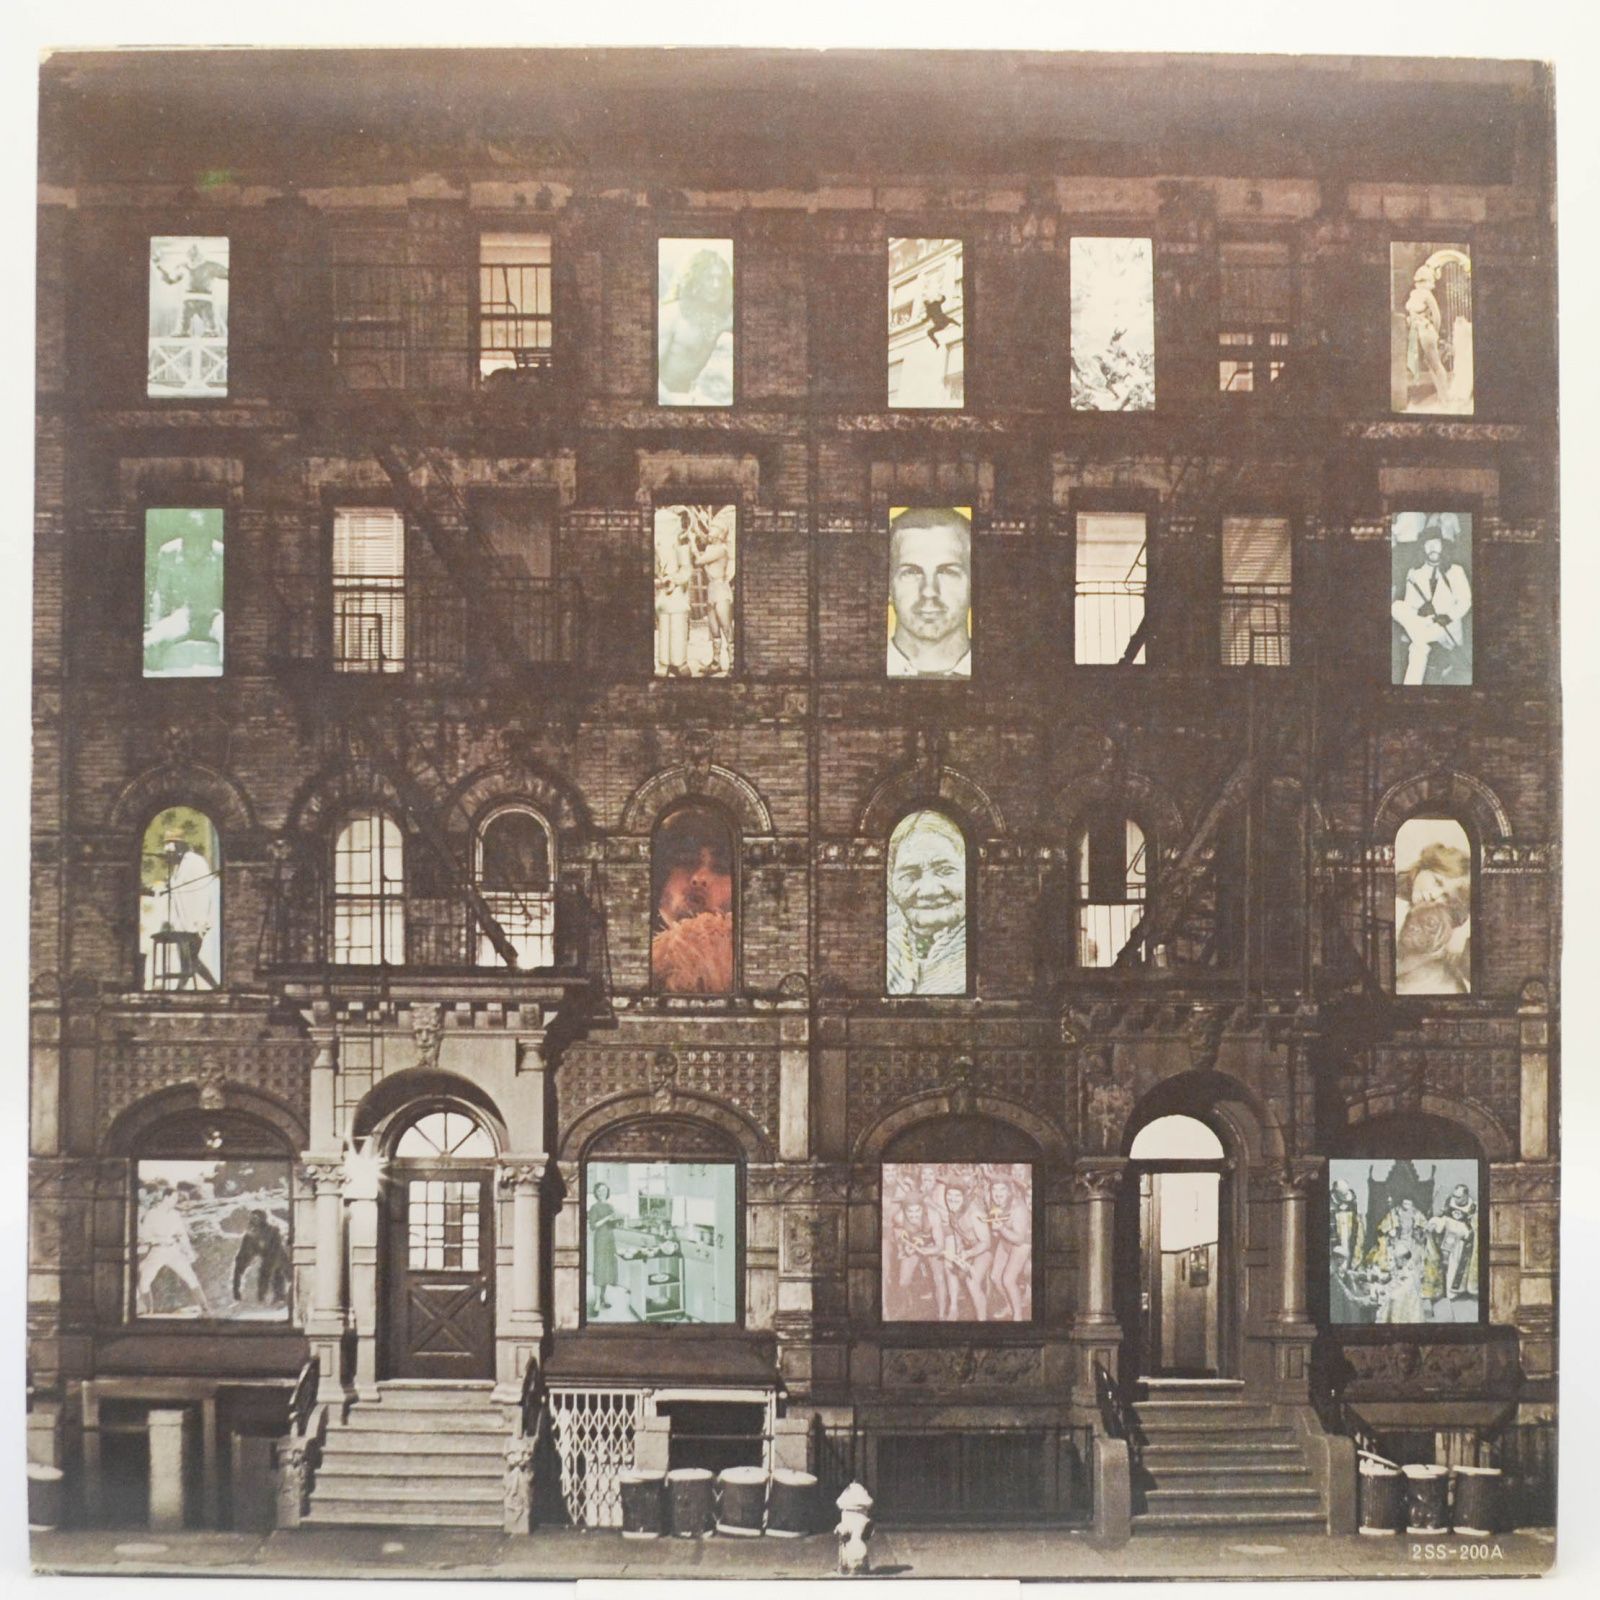 Led zeppelin physical. Лед Зеппелин physical Graffiti. Led Zeppelin physical Graffiti LP. Led Zeppelin physical Graffiti 1975 обложка. Led Zeppelin. Physical Graffiti 2 LP.